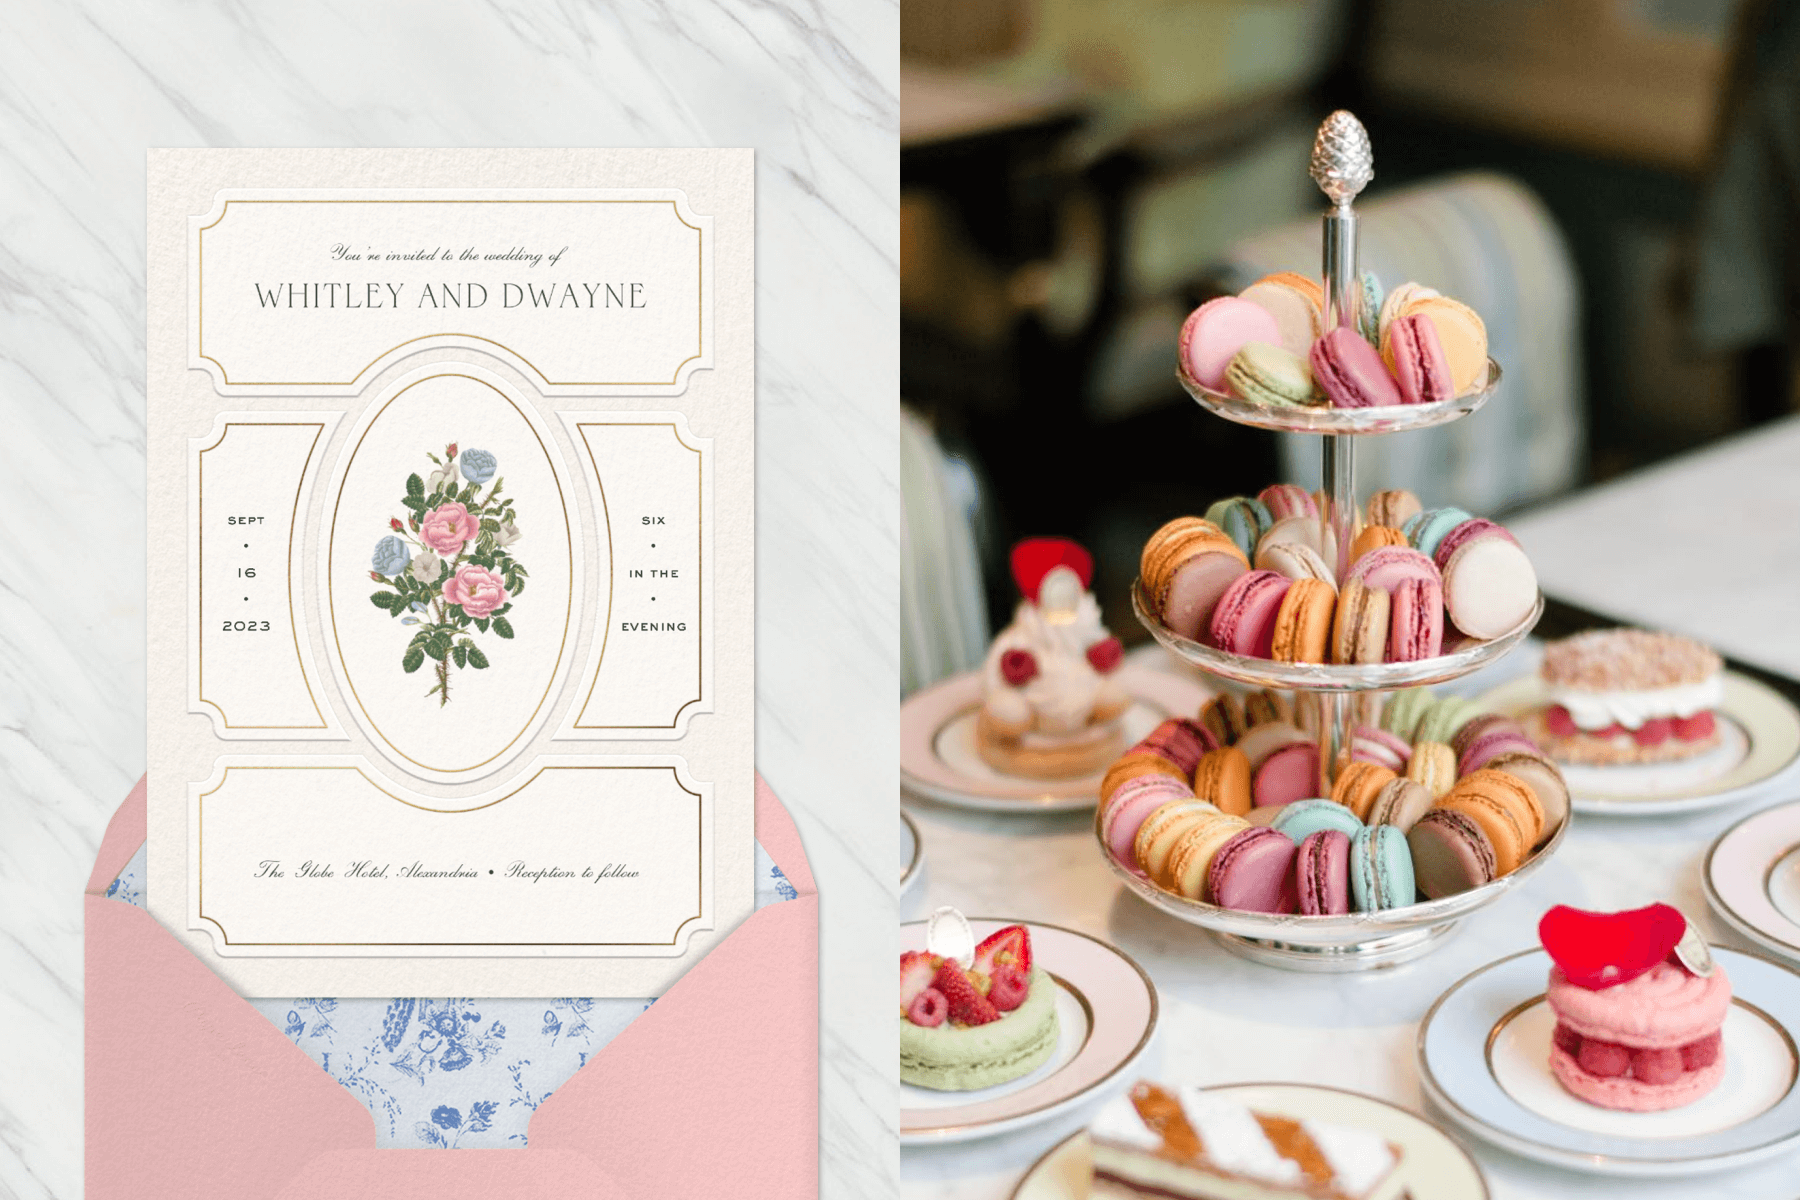 A vertical bridal shower invitation with a scrapbook style and a delicate flower bouquet illustration. Right: A dessert tower filled with rainbow macarons.